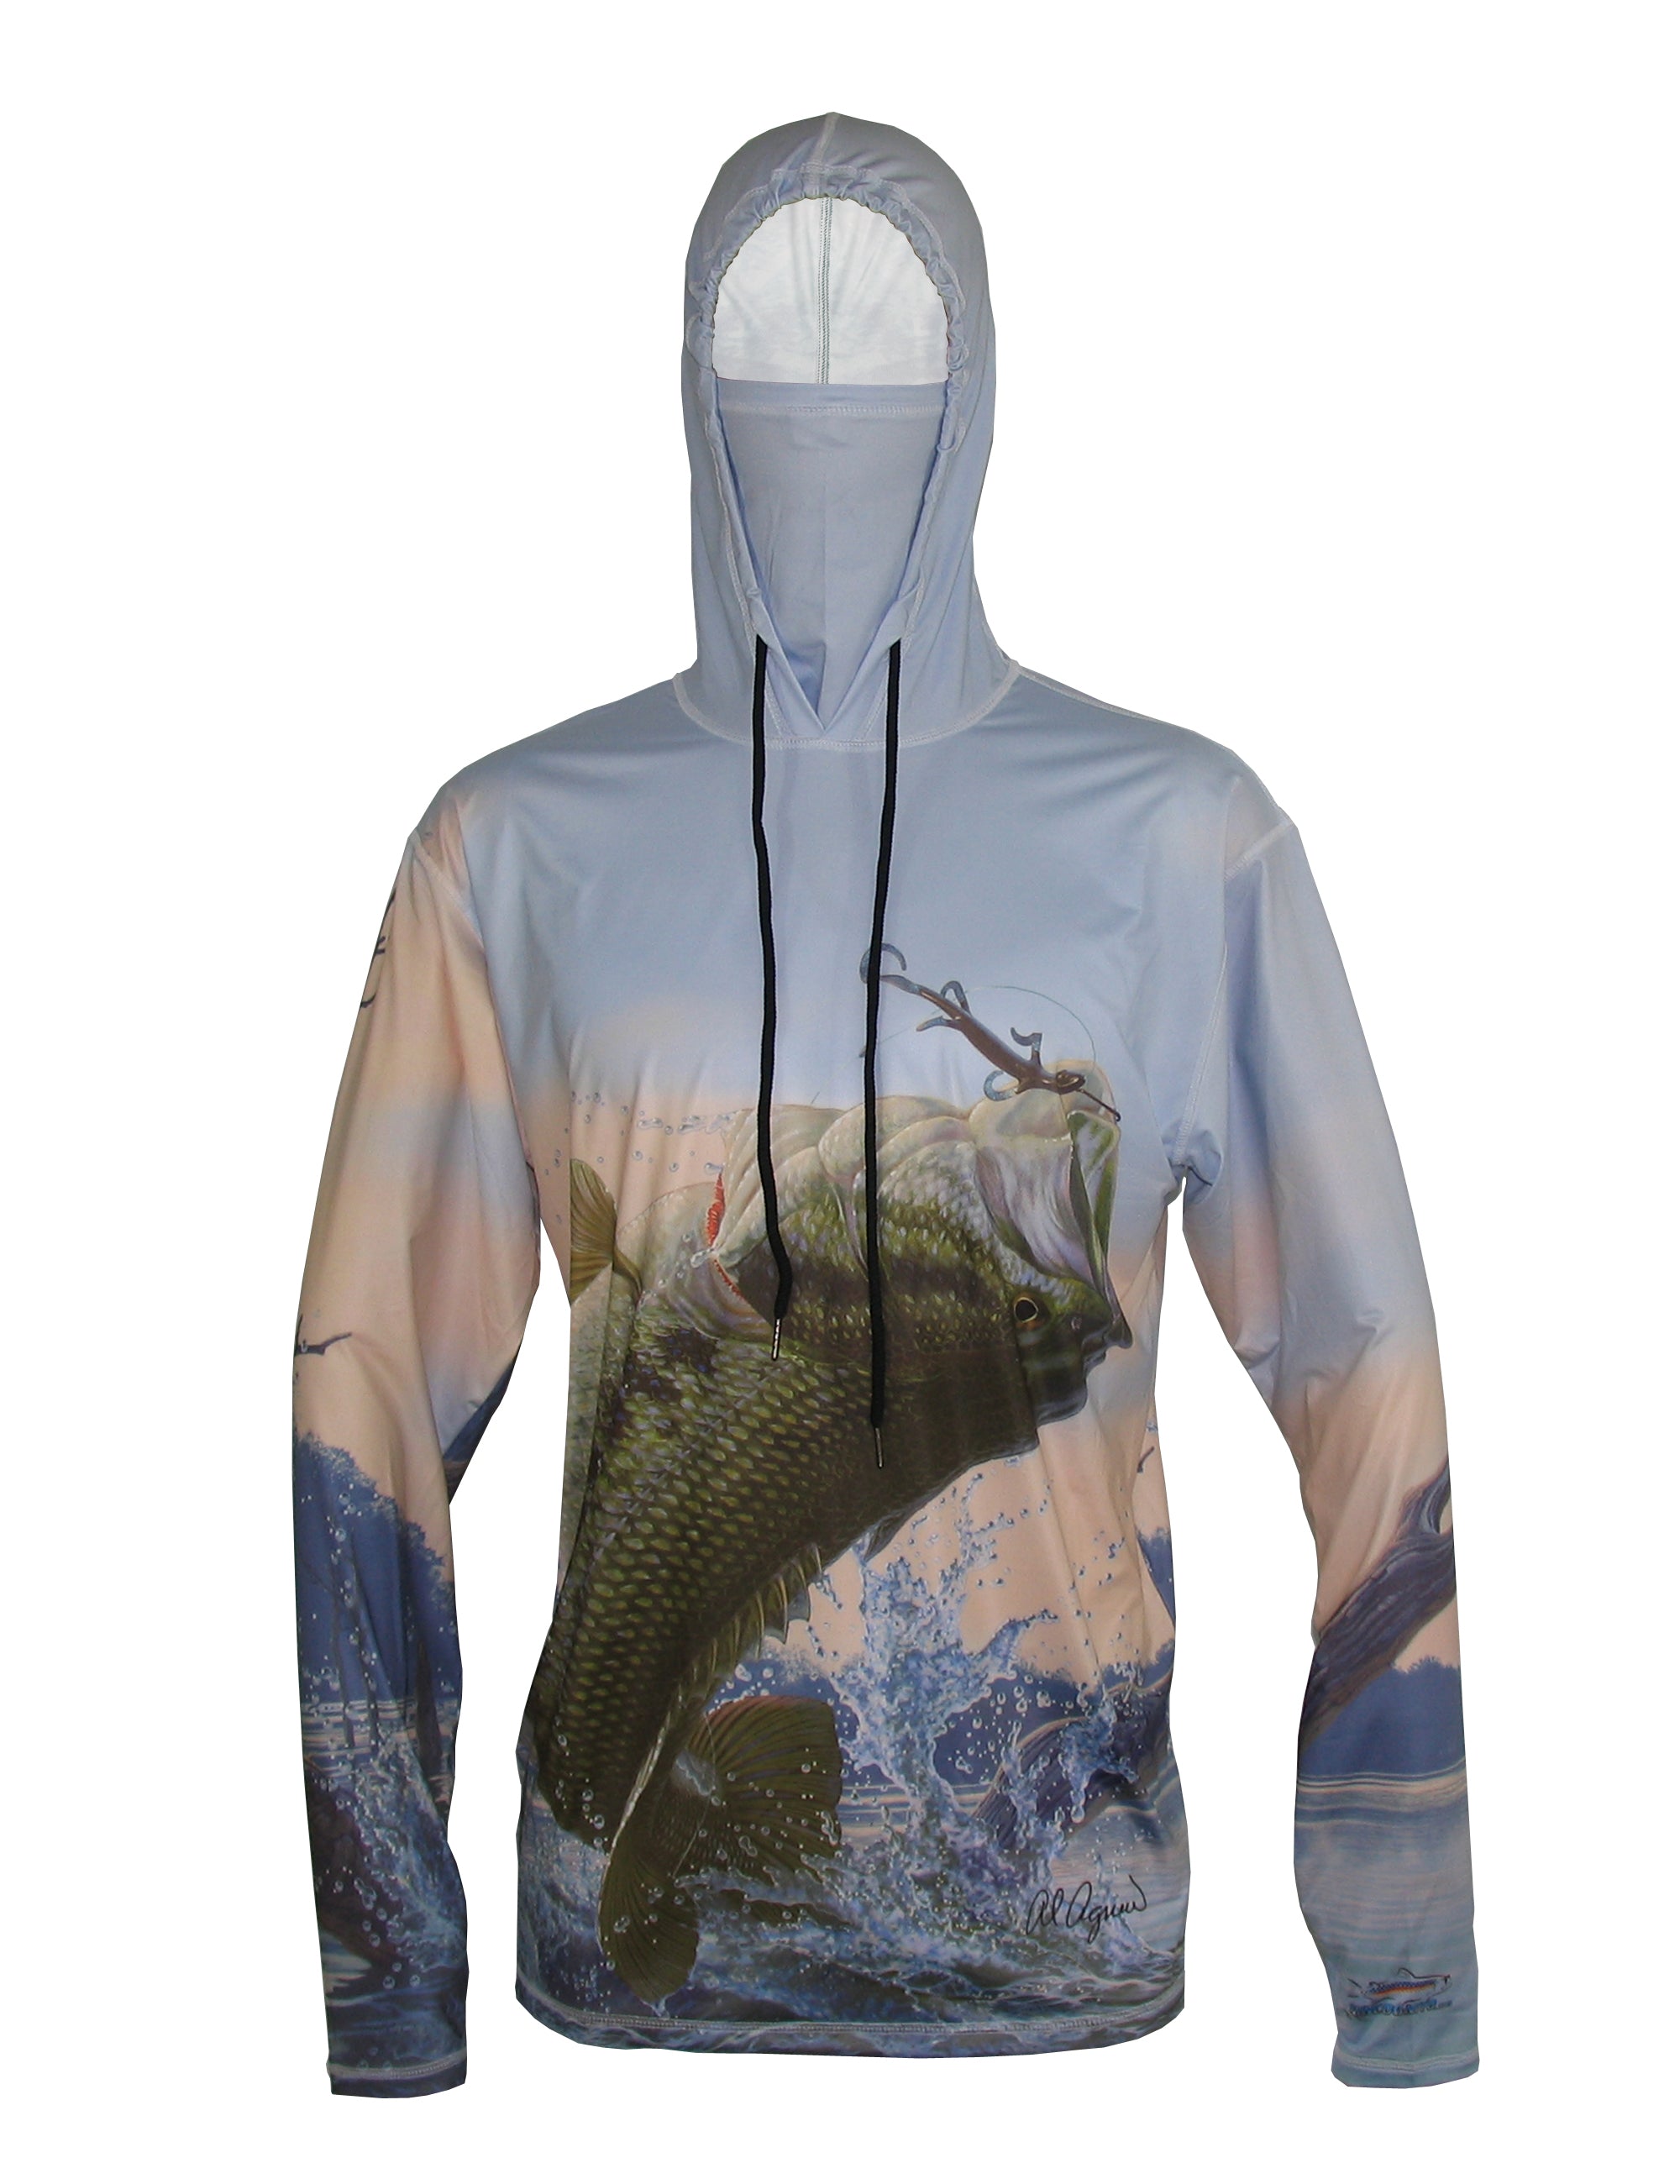 Fly Fishing Gear: The Perfect Hoodie Doesn't existYet - Men's Journal